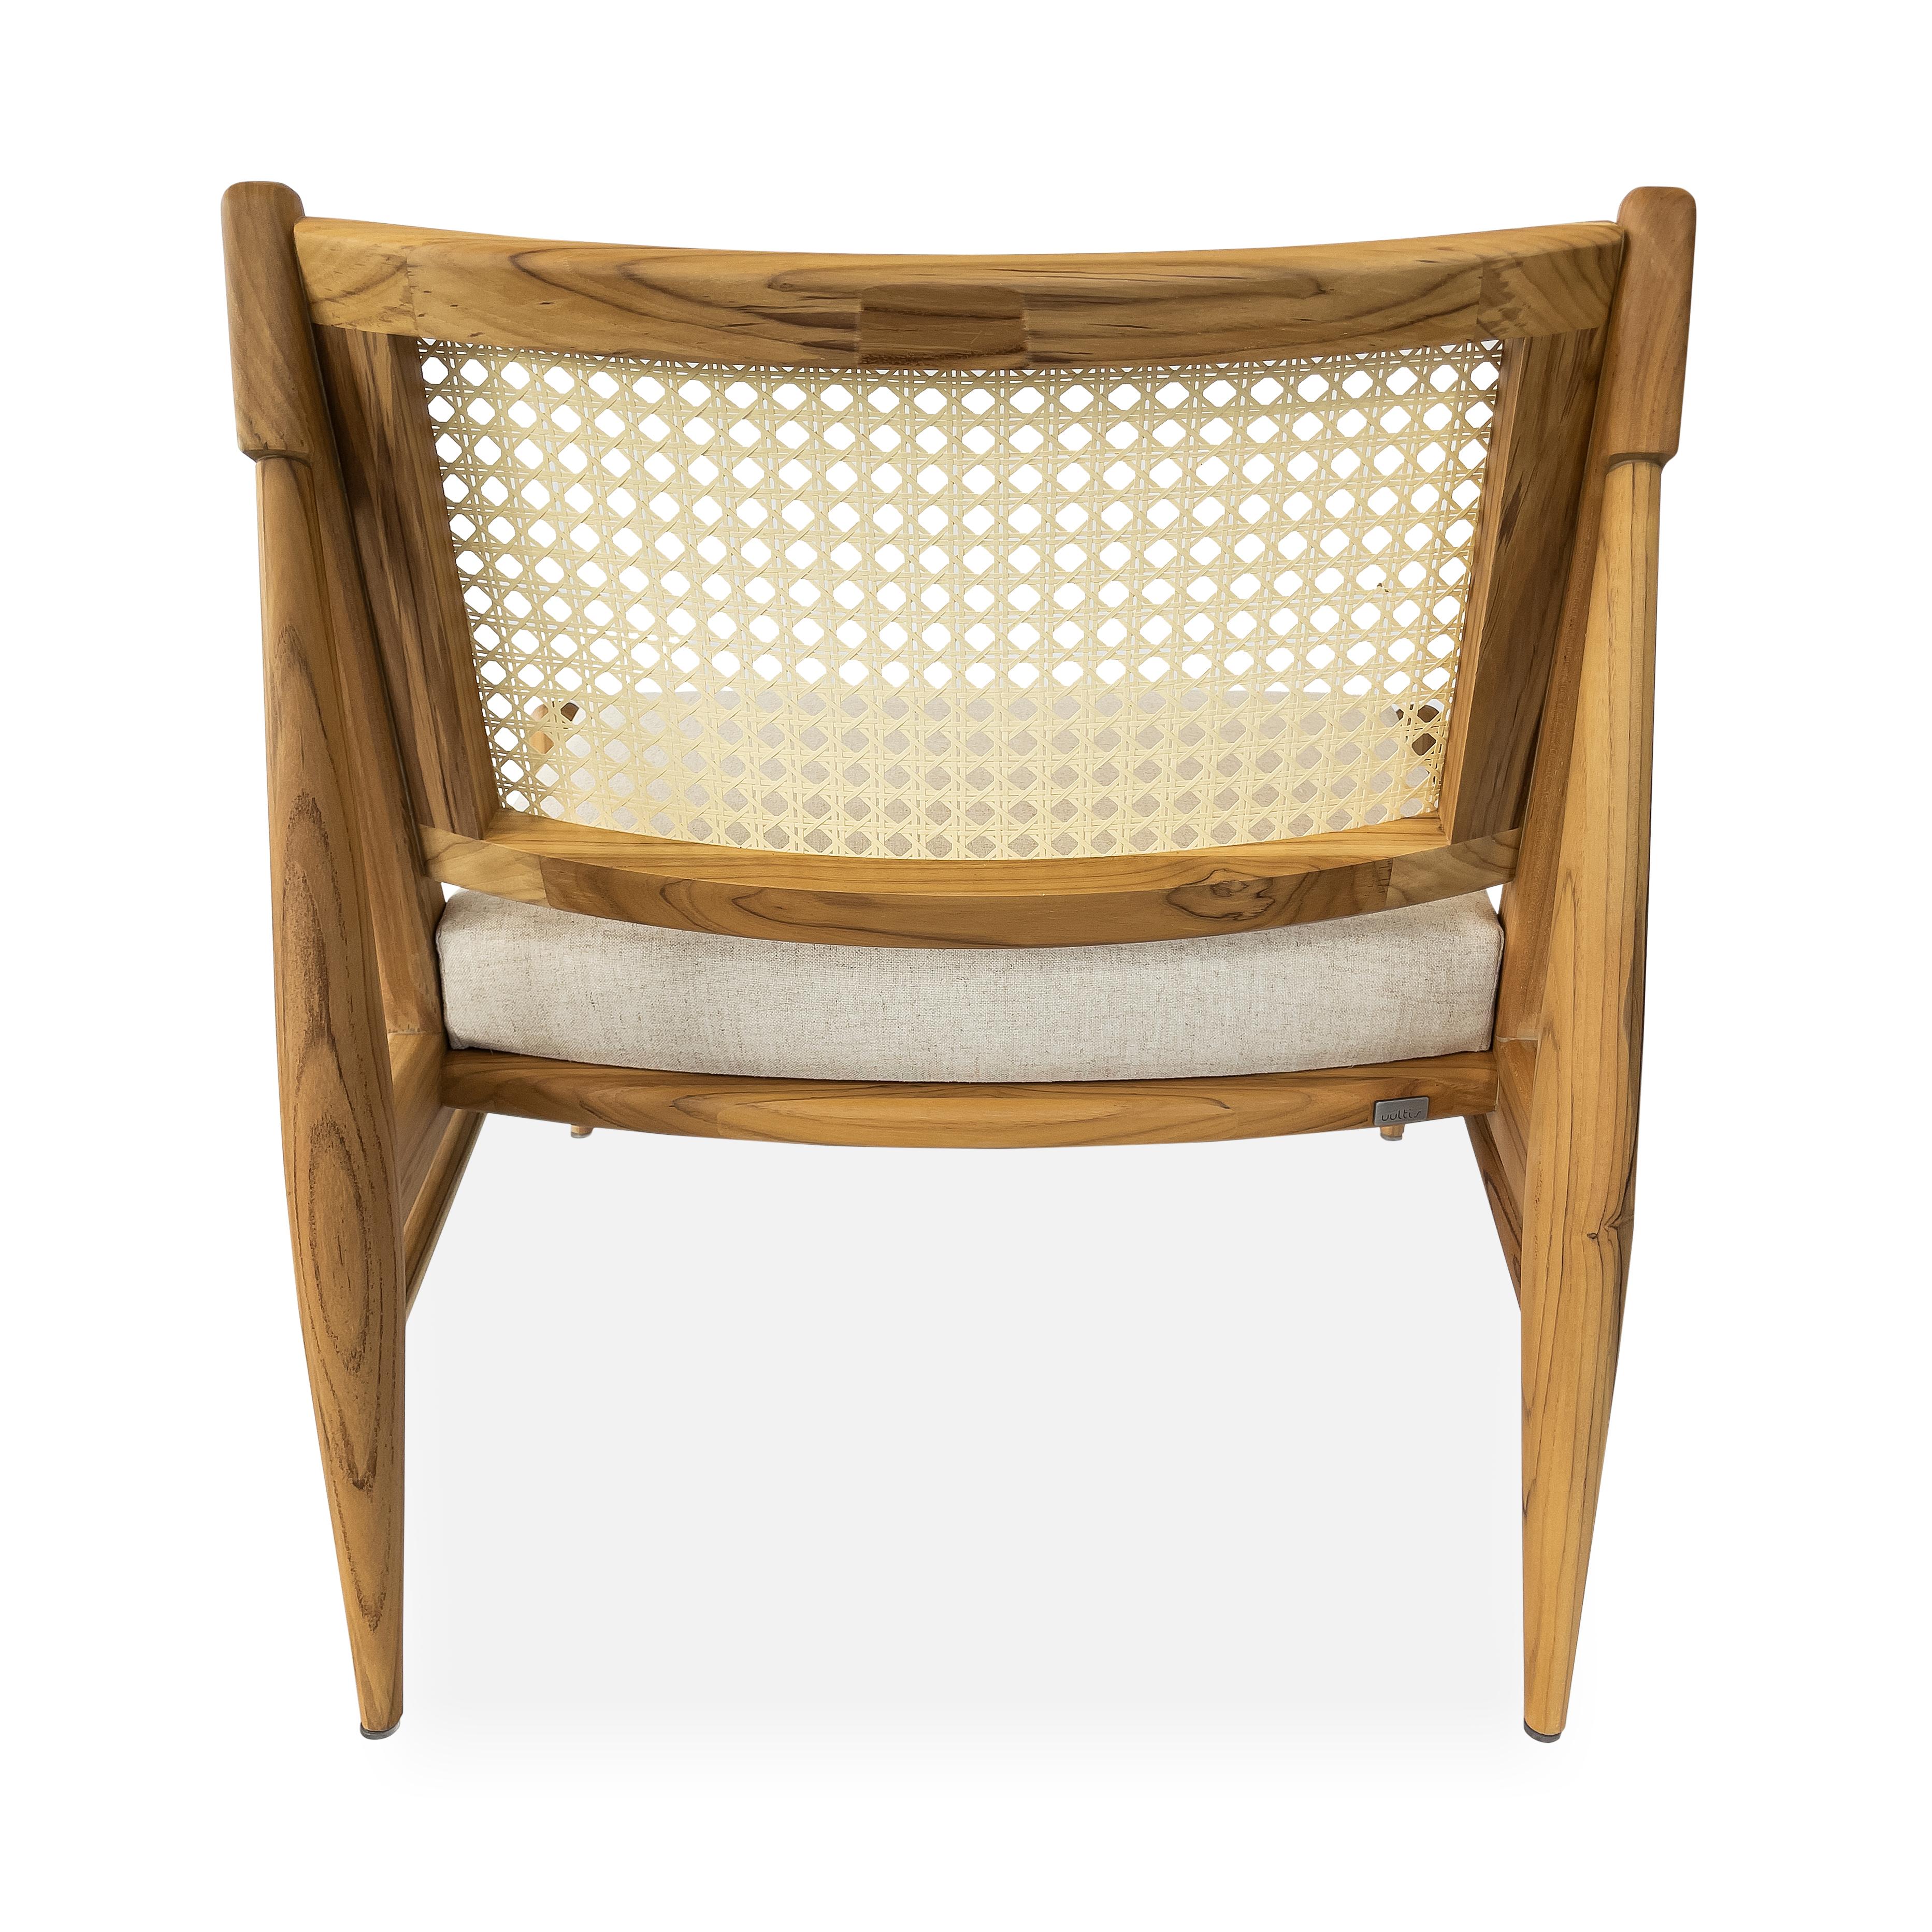 Donna Cane-Back Chair in Teak Wood Finish with Oatmeal Fabric Seat For Sale 5